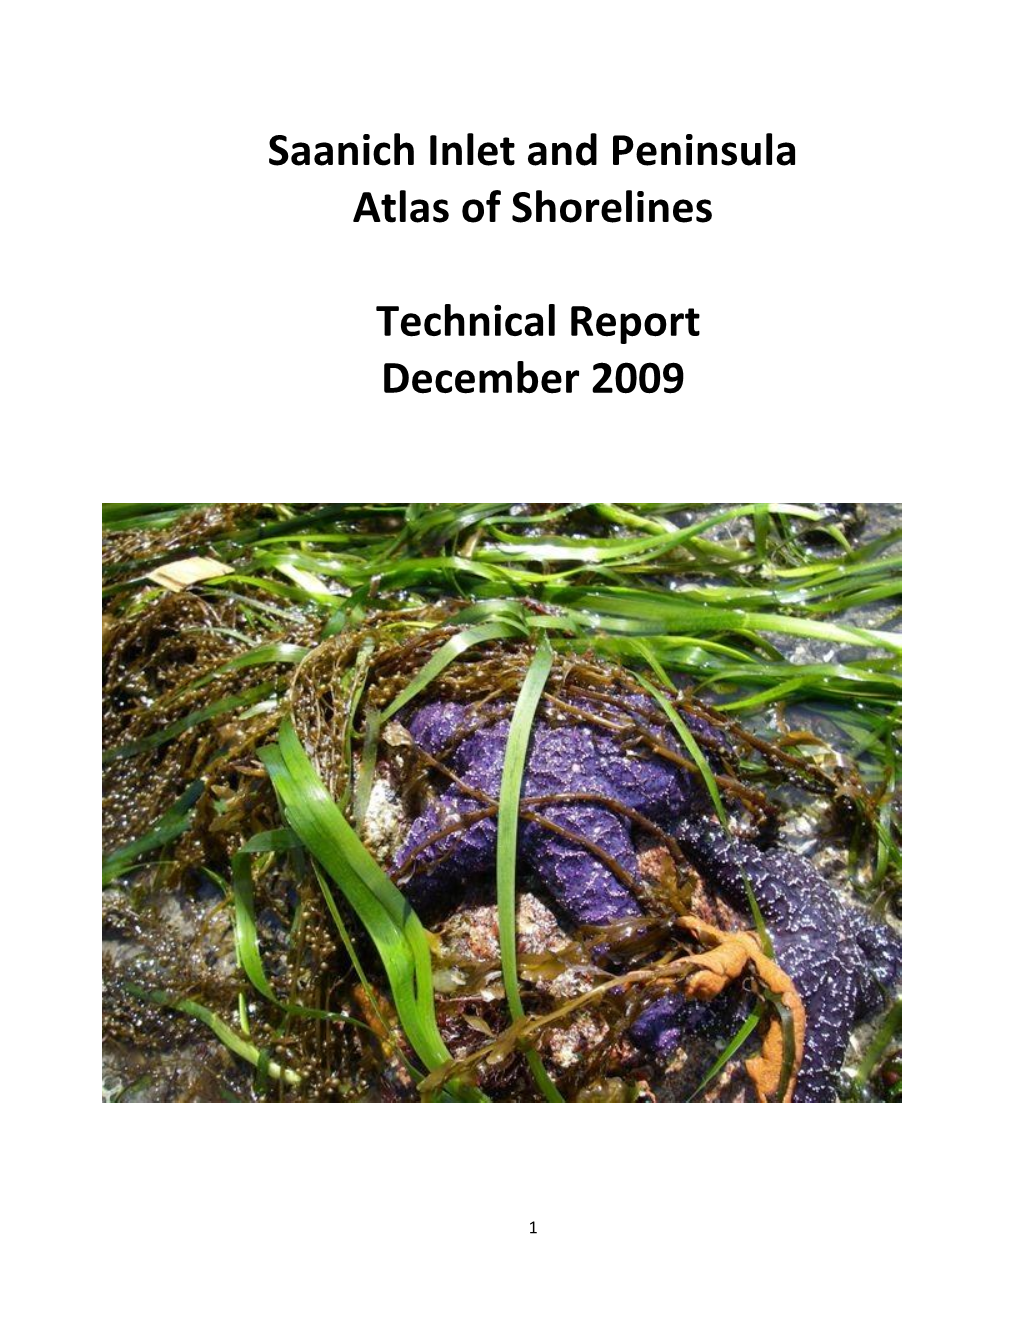 Saanich Inlet and Peninsula Atlas of Shorelines Technical Report